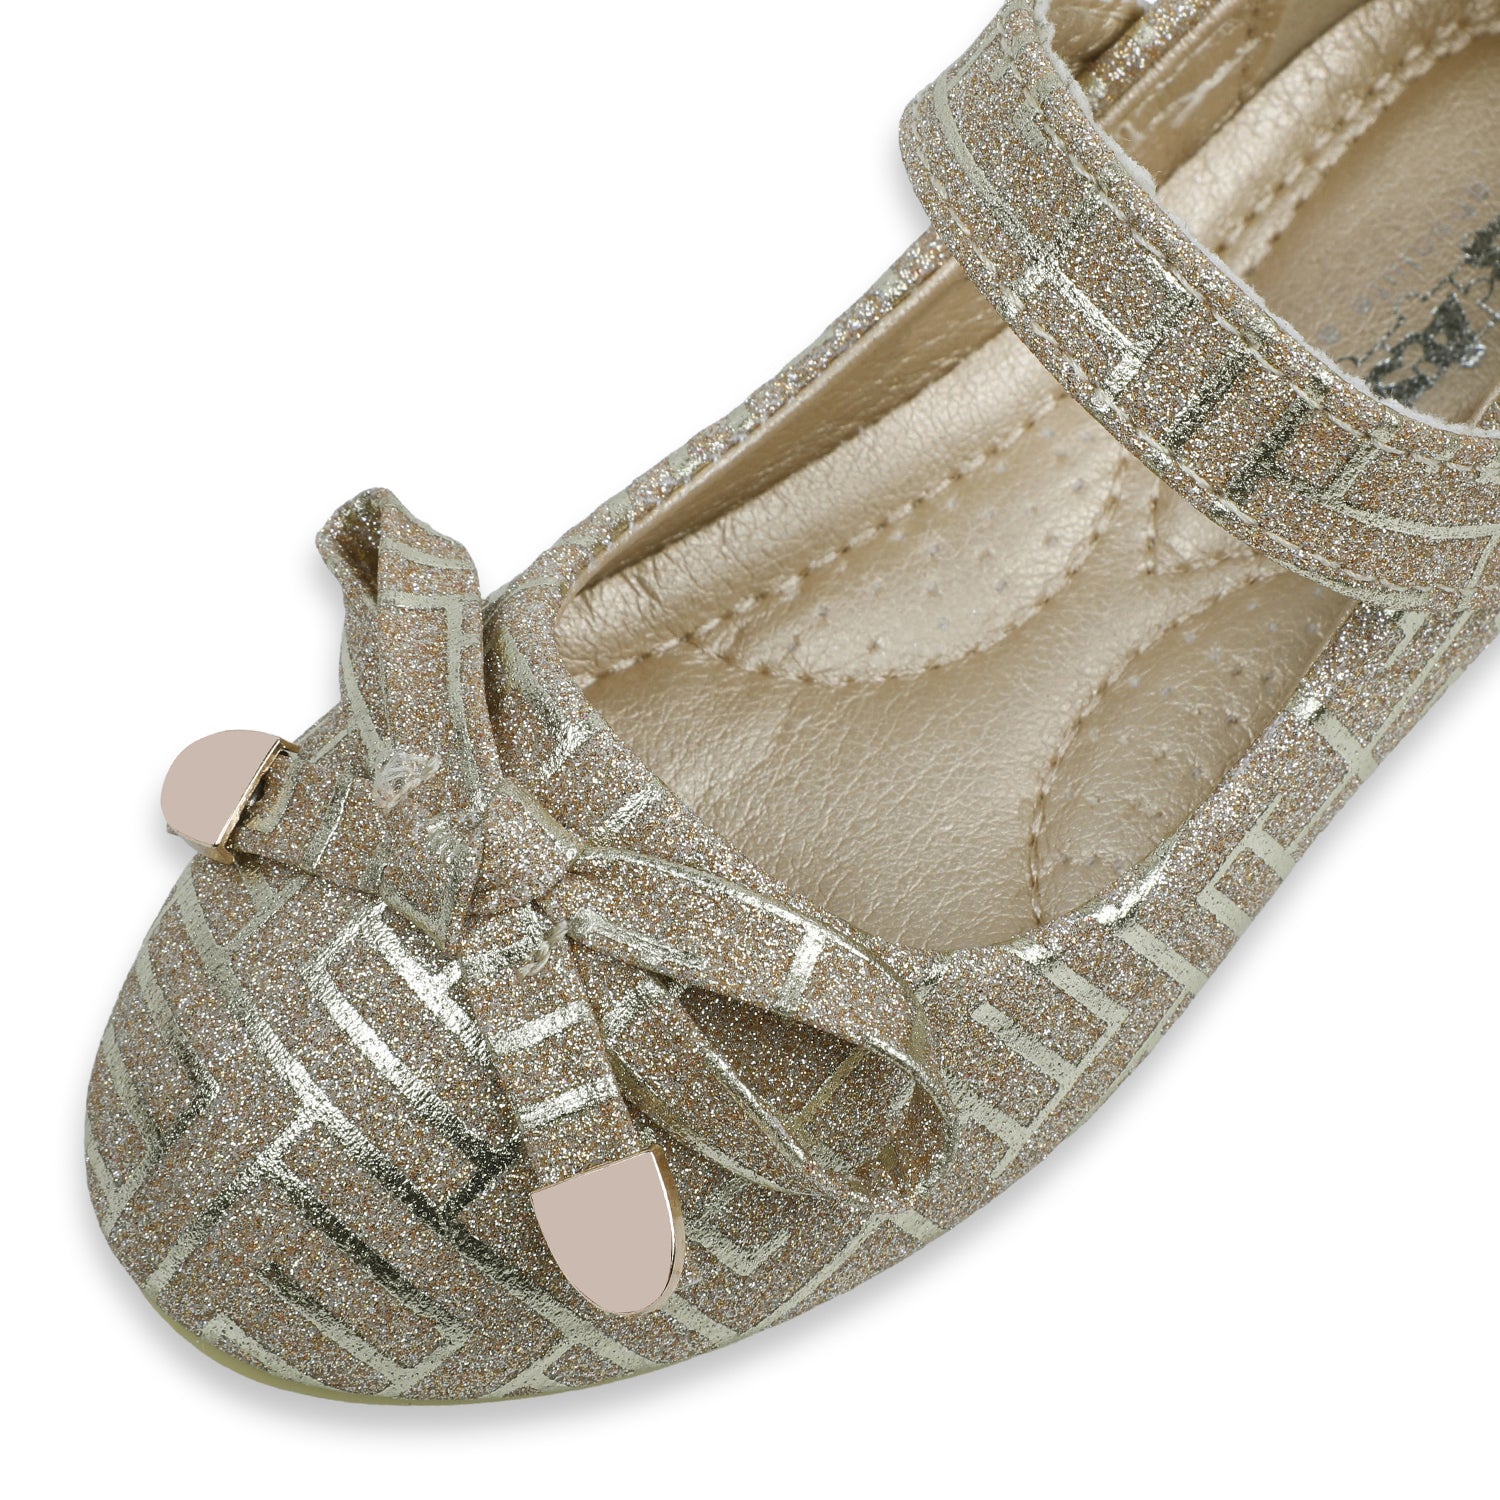 Baby Moo x Bash Kids Embellished Shimmer With Bow Mary Jane Ballerinas - Gold